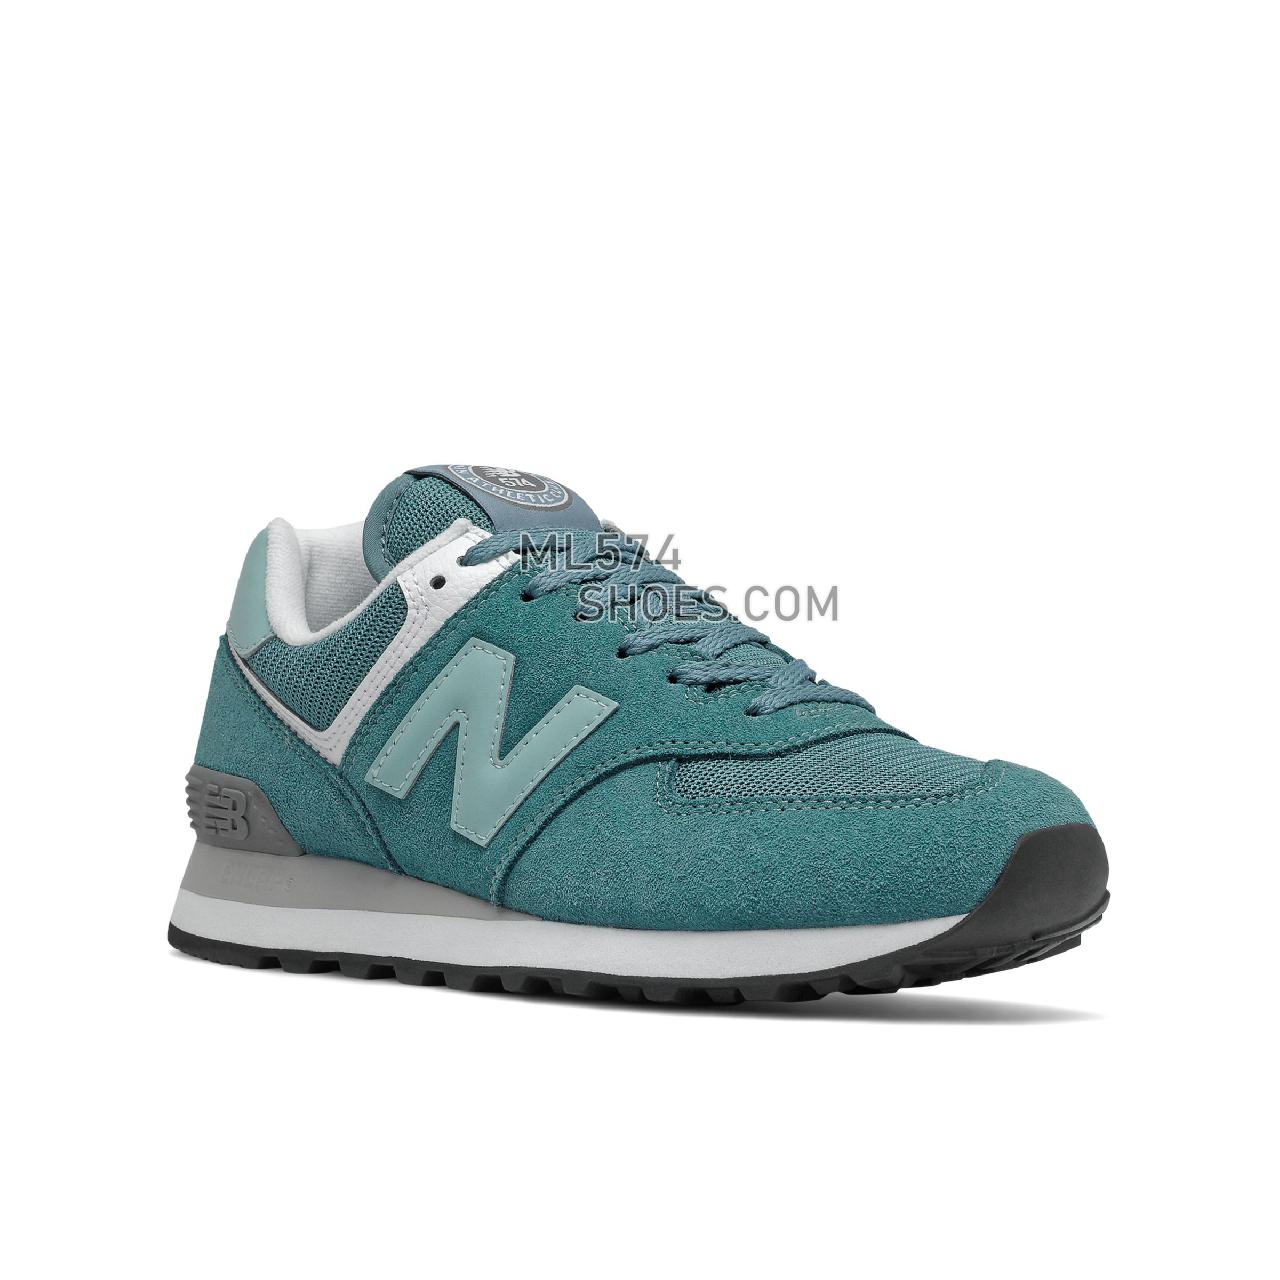 New Balance 574 - Women's Classic Sneakers - Deep Sea with Storm Blue - WL574HC2